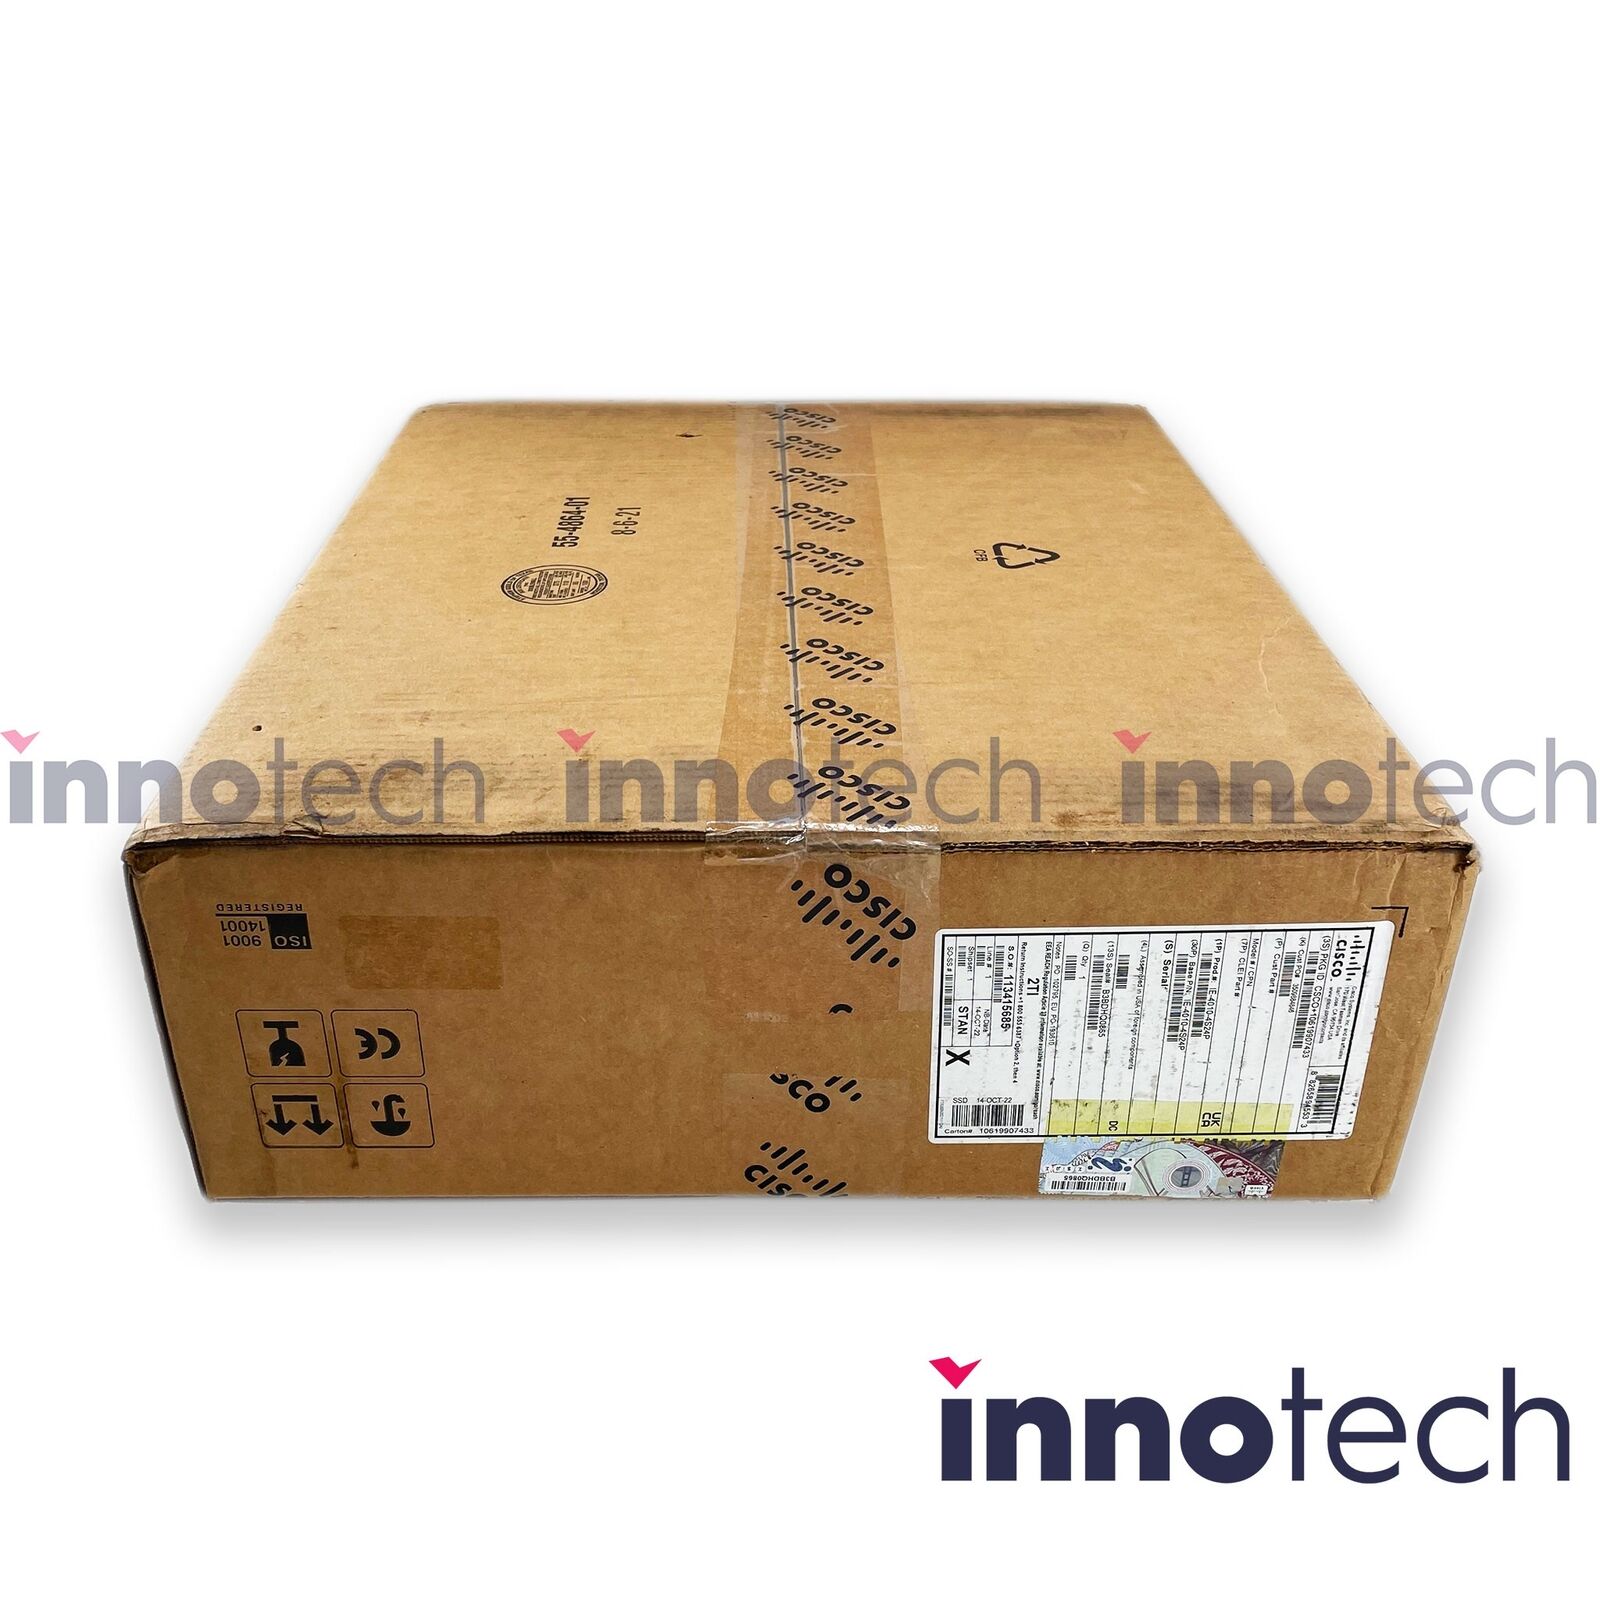 Cisco IE-4010-4S24P Industrial Ethernet Switch New Sealed